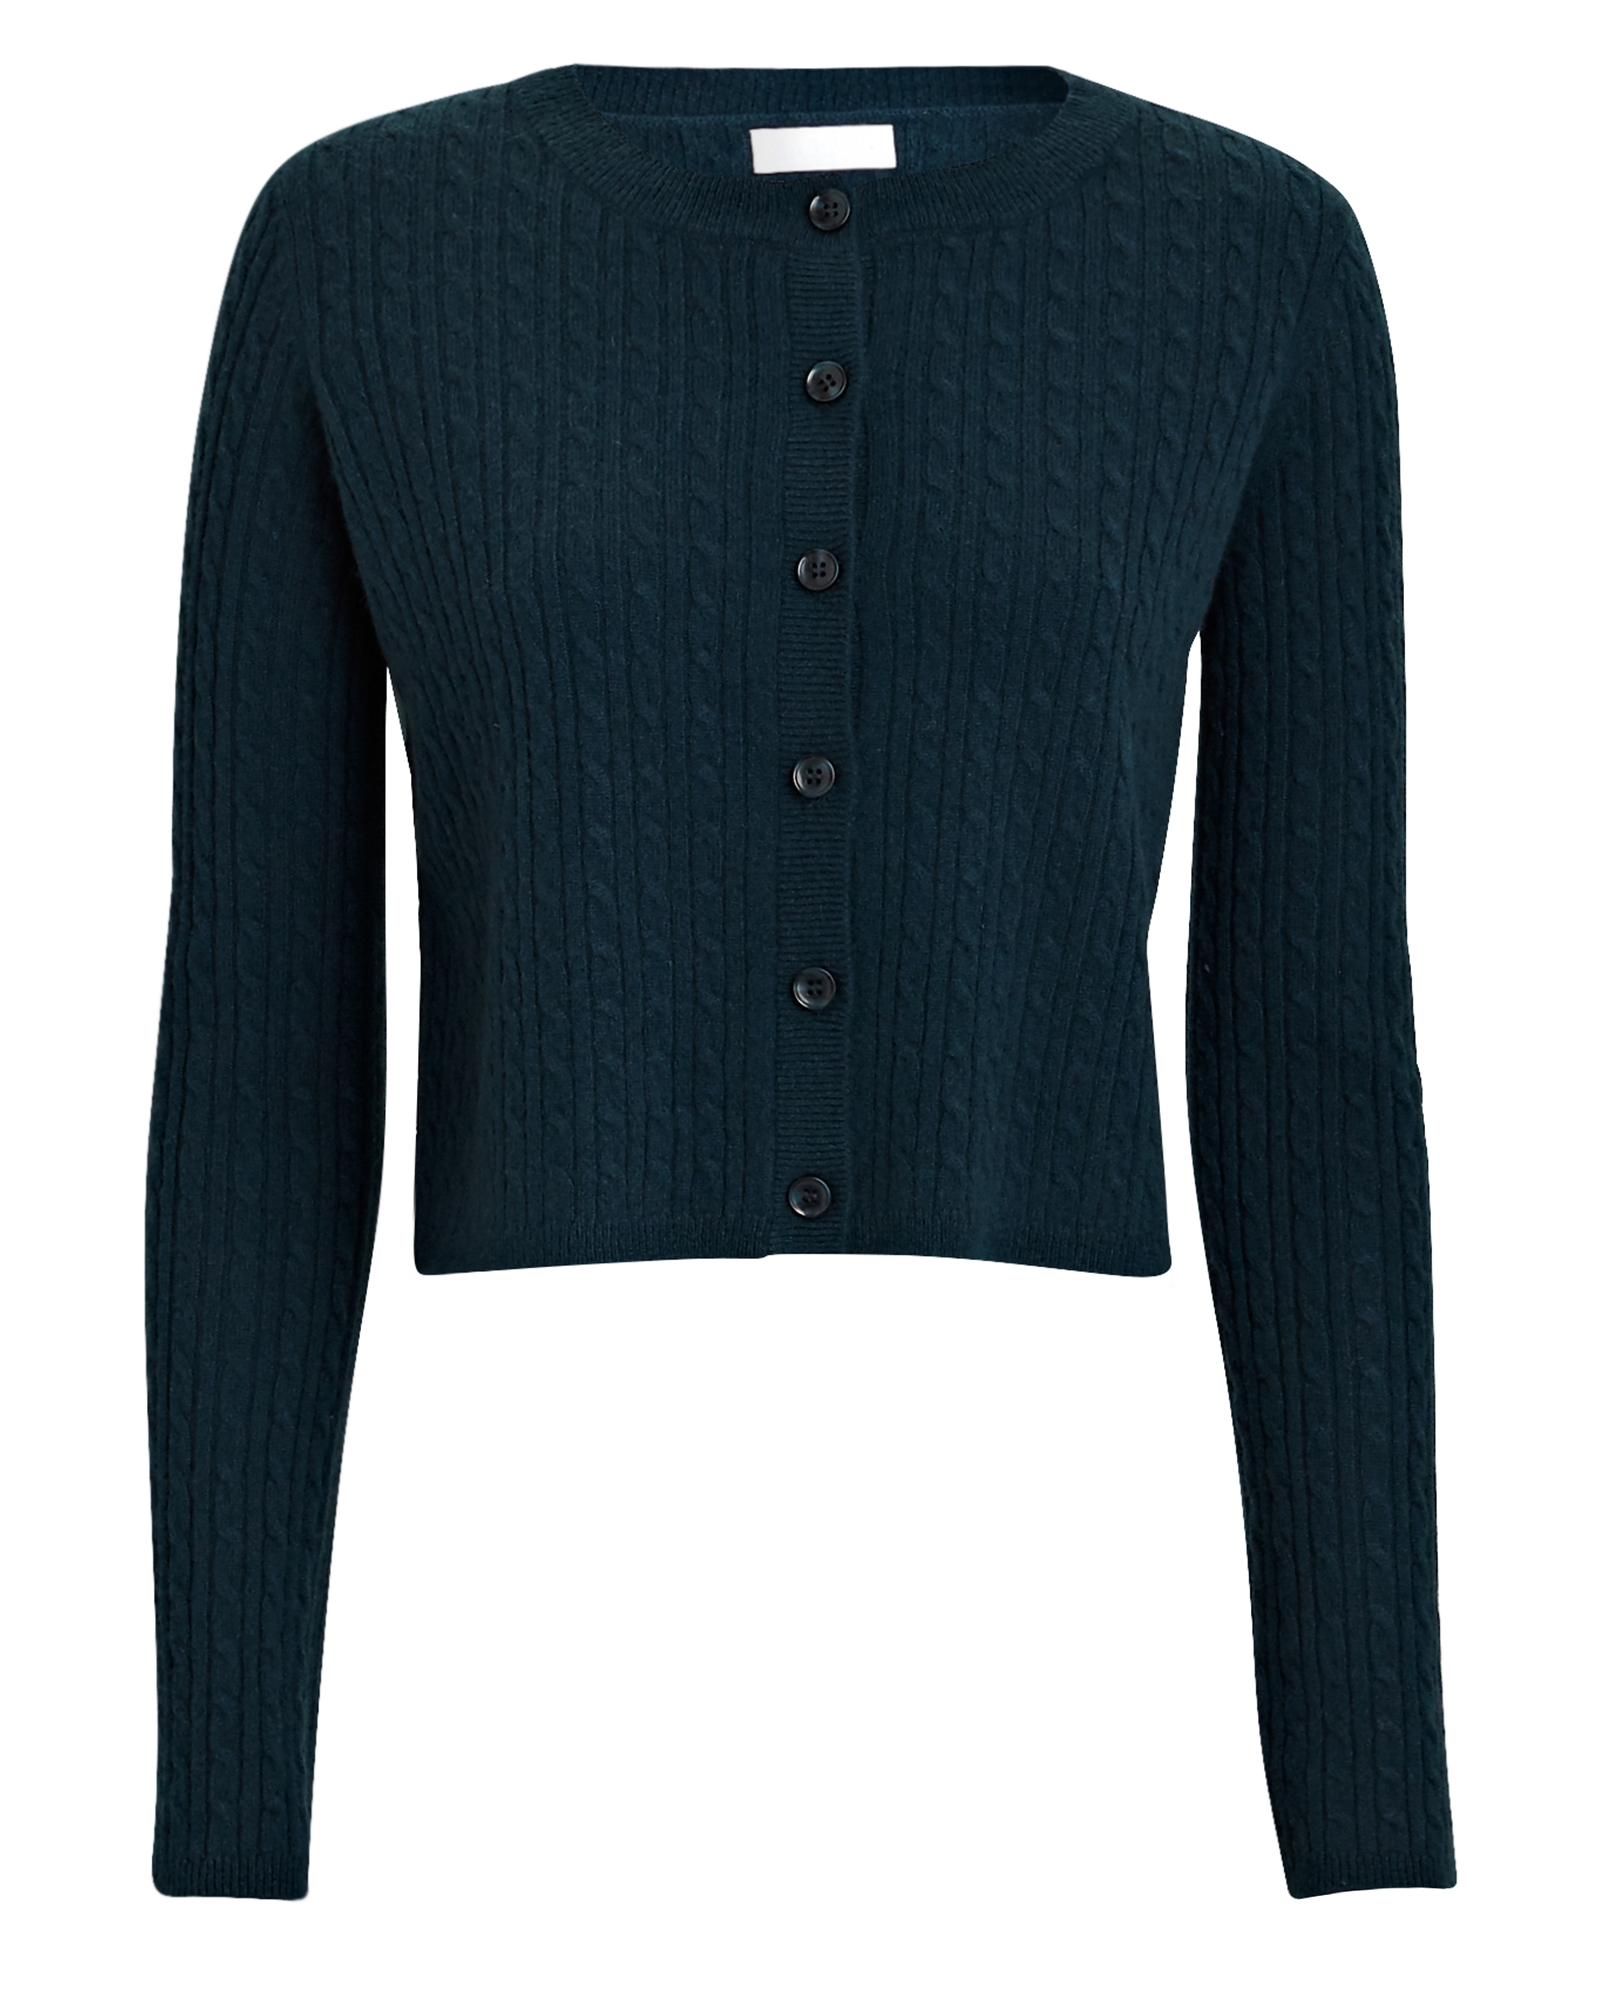 SABLYN Cleo Cable Knit Cashmere Cardigan | INTERMIX®